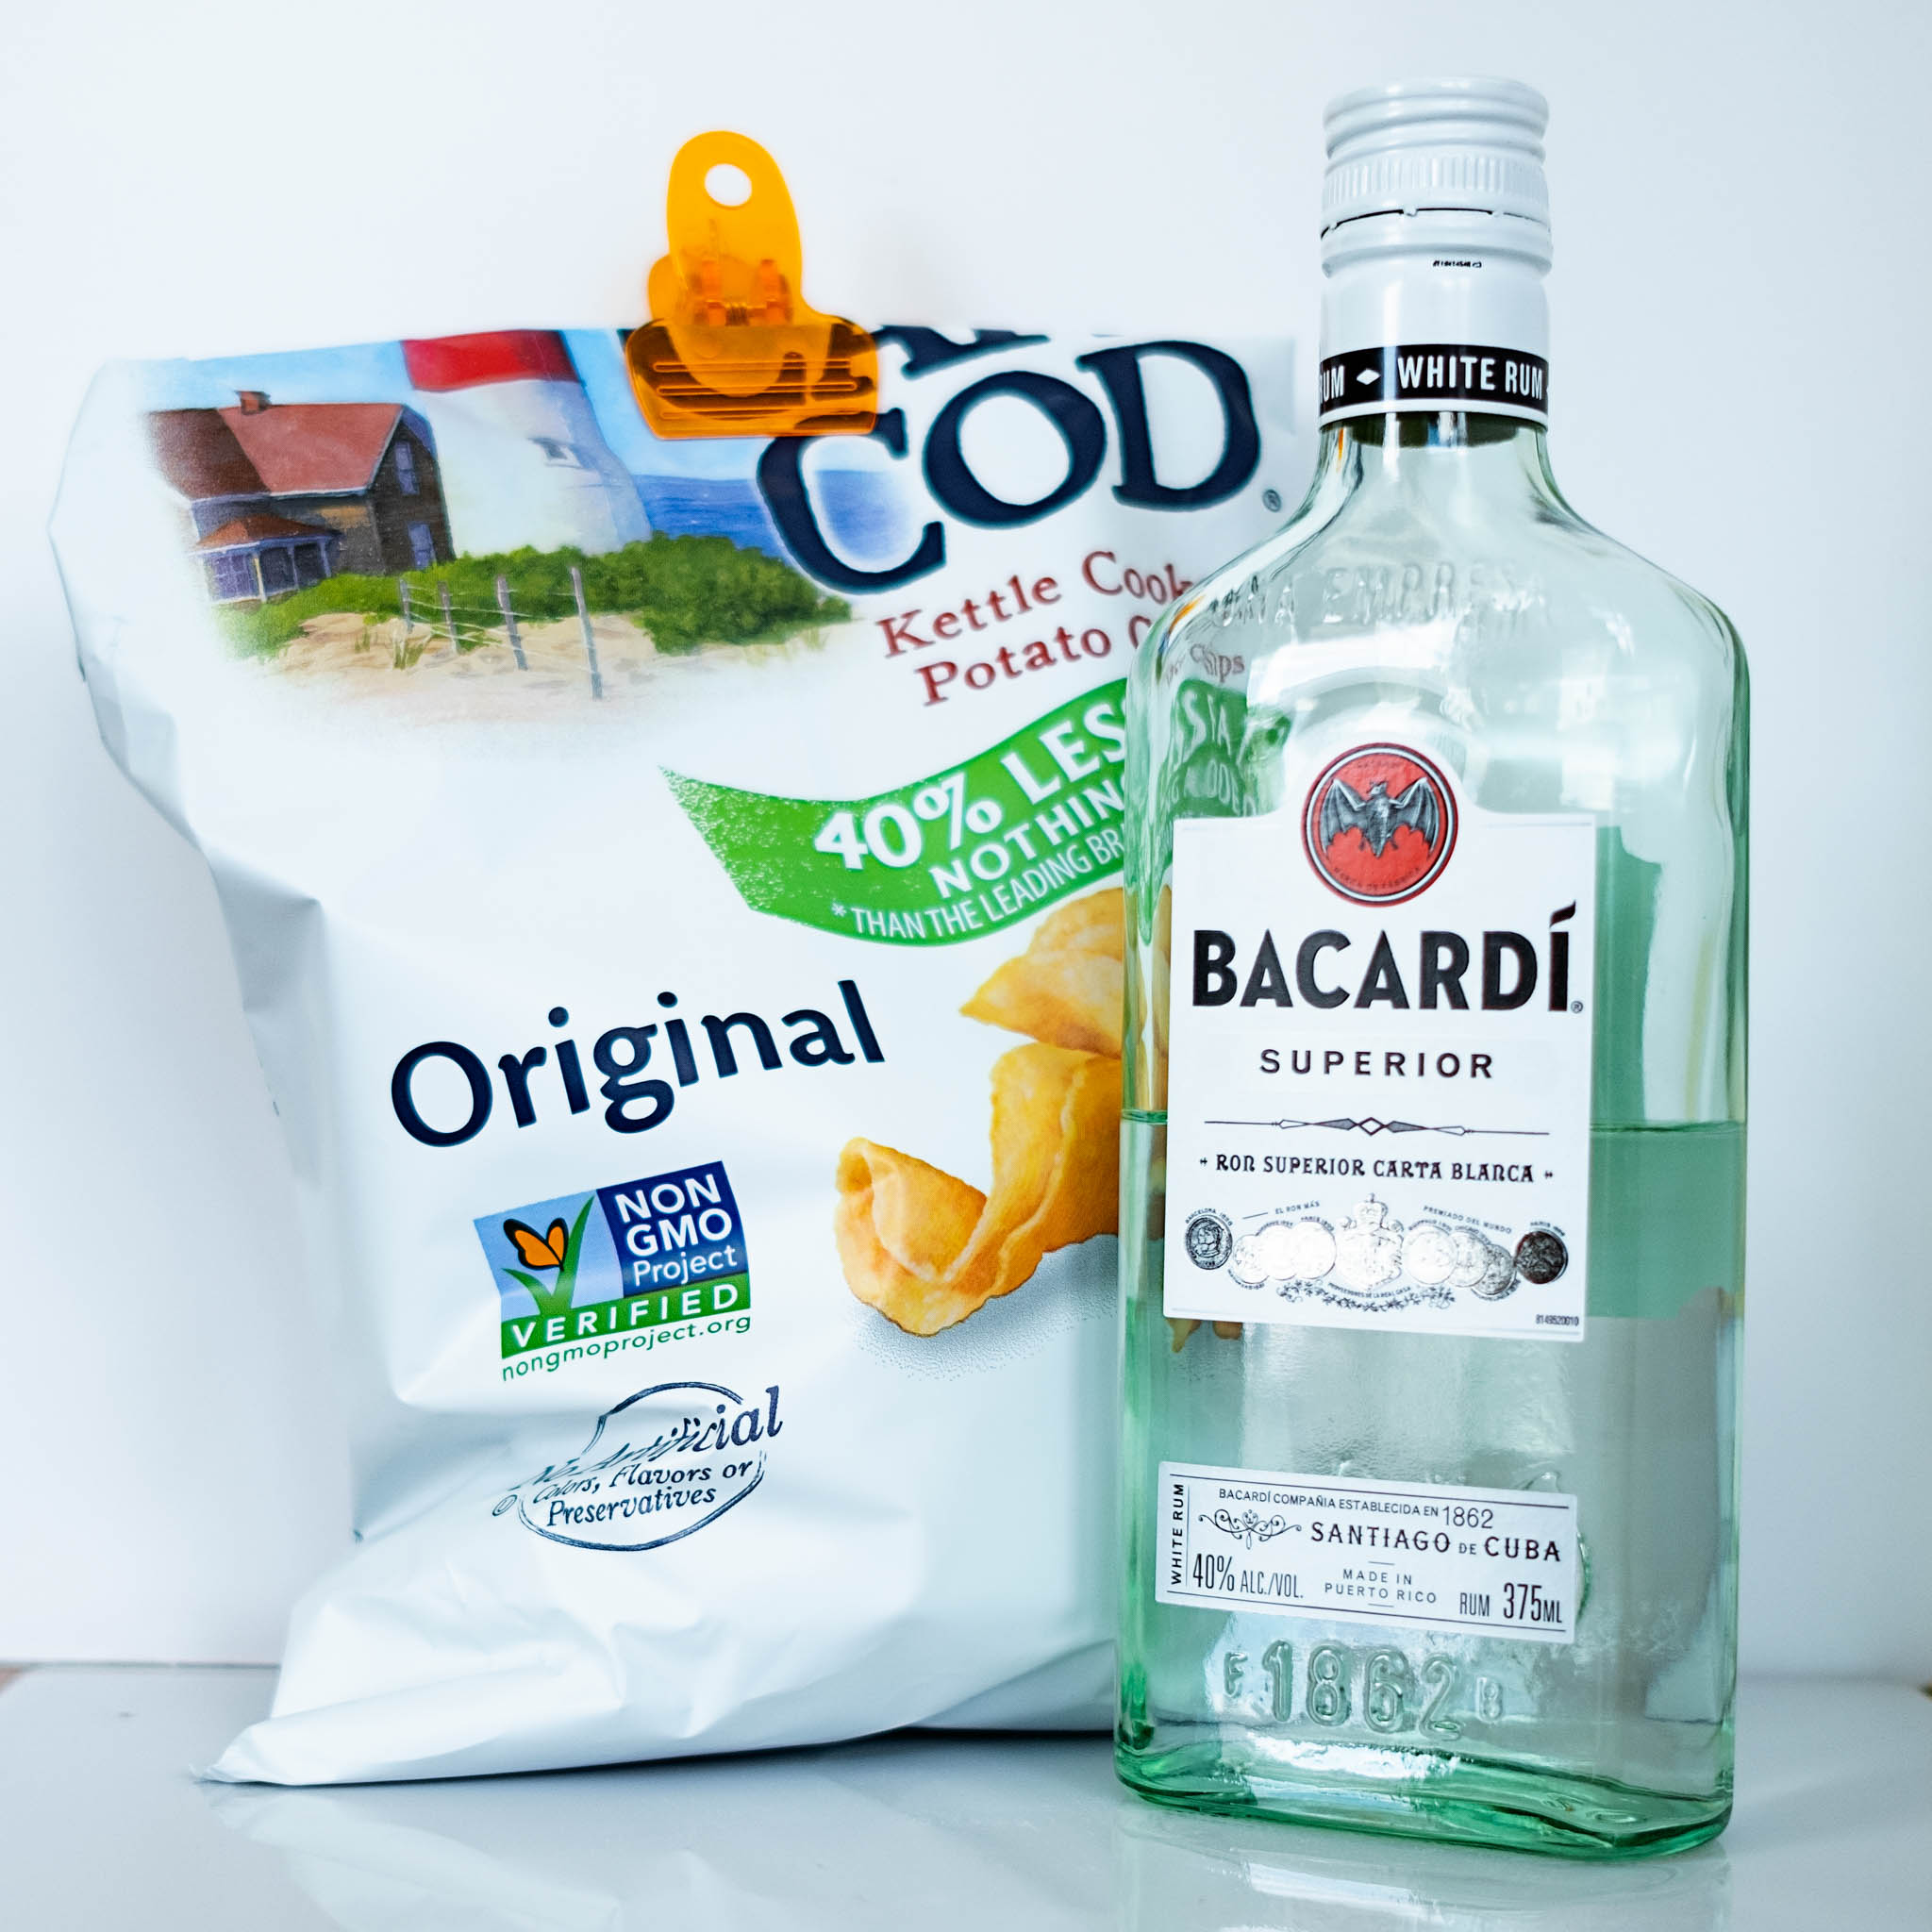 Meal of Cape Cod potato chips and Bacardi Rum photographed by Kathleen Kent